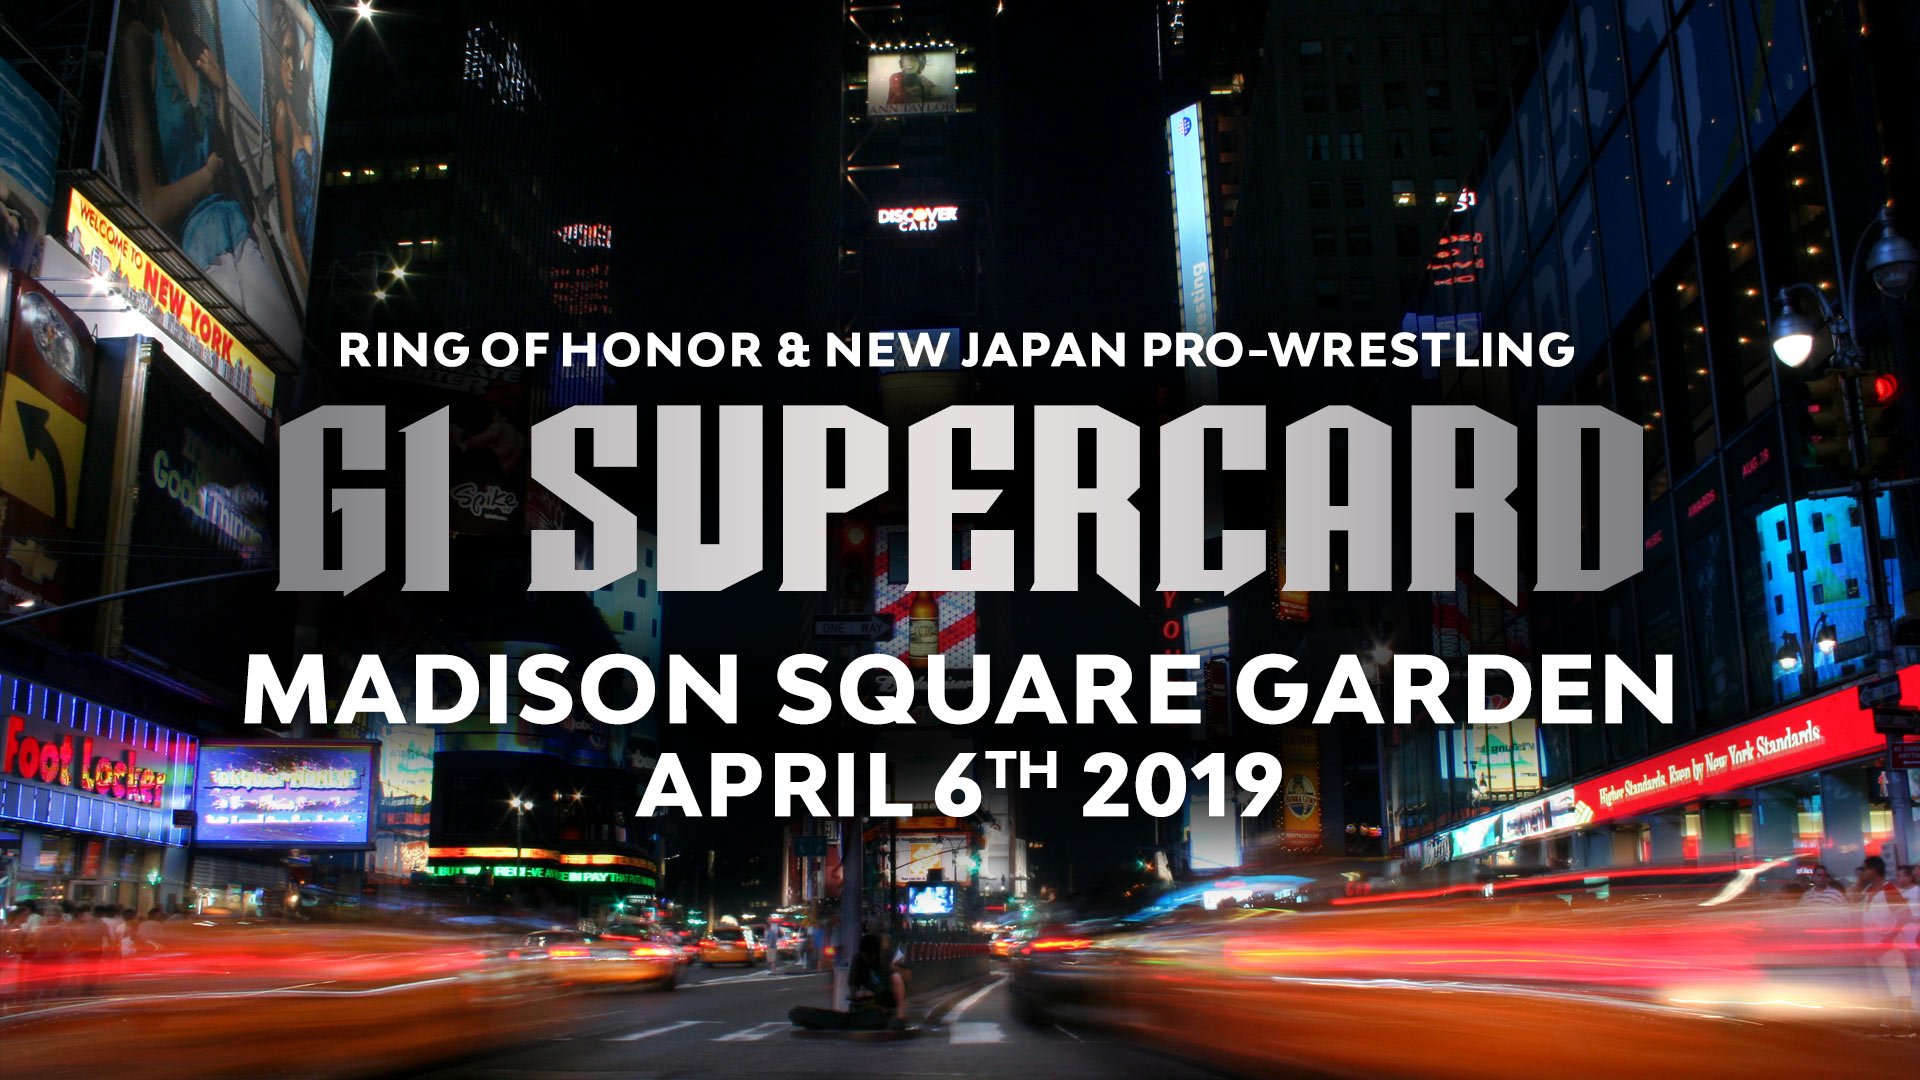 ROH & NJPW Sell Out Madison Square Garden w/ G1 Supercard